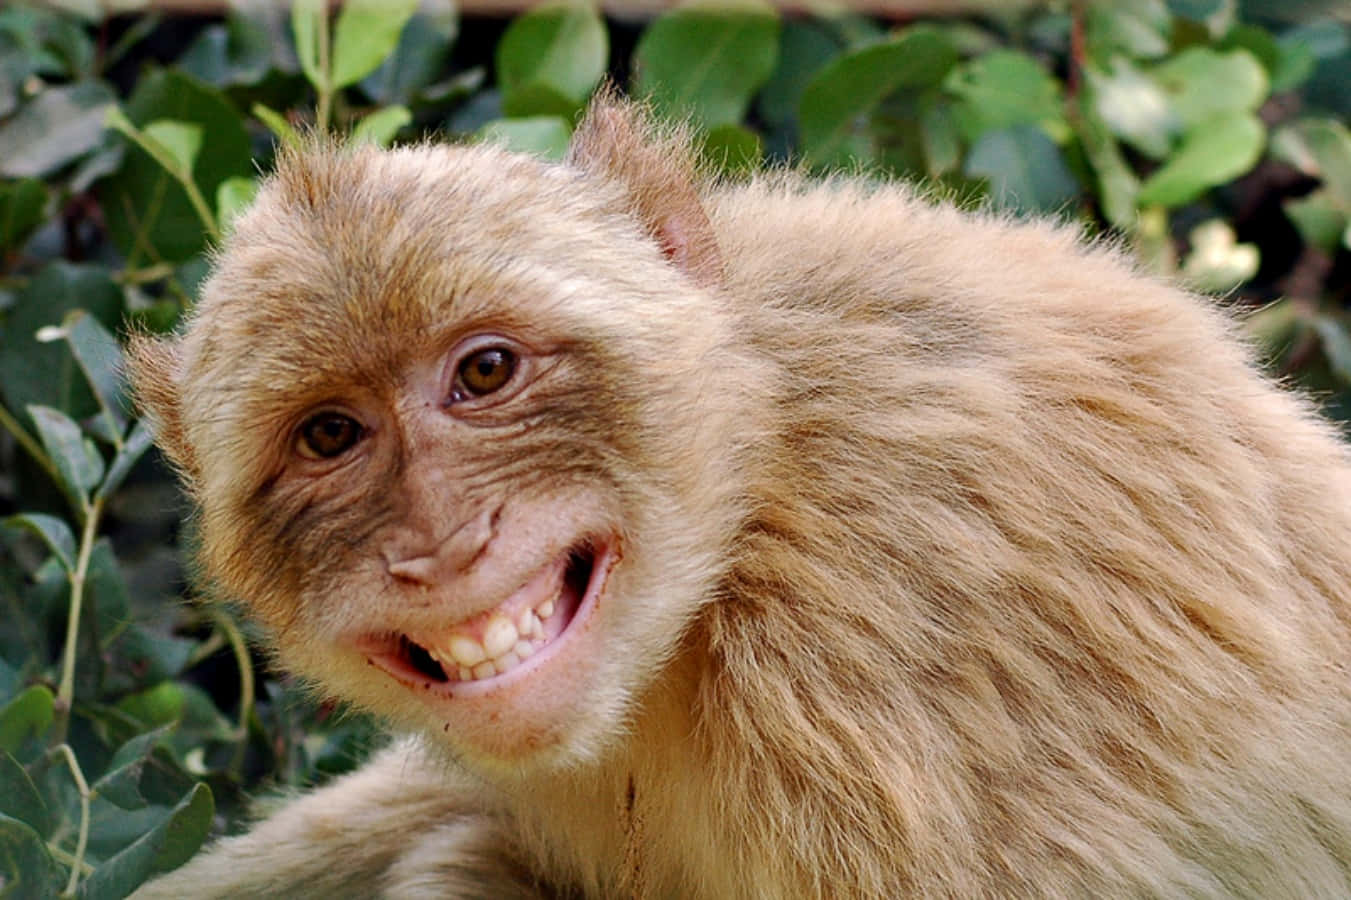 Laugh Out Loud with This Hilarious Monkey